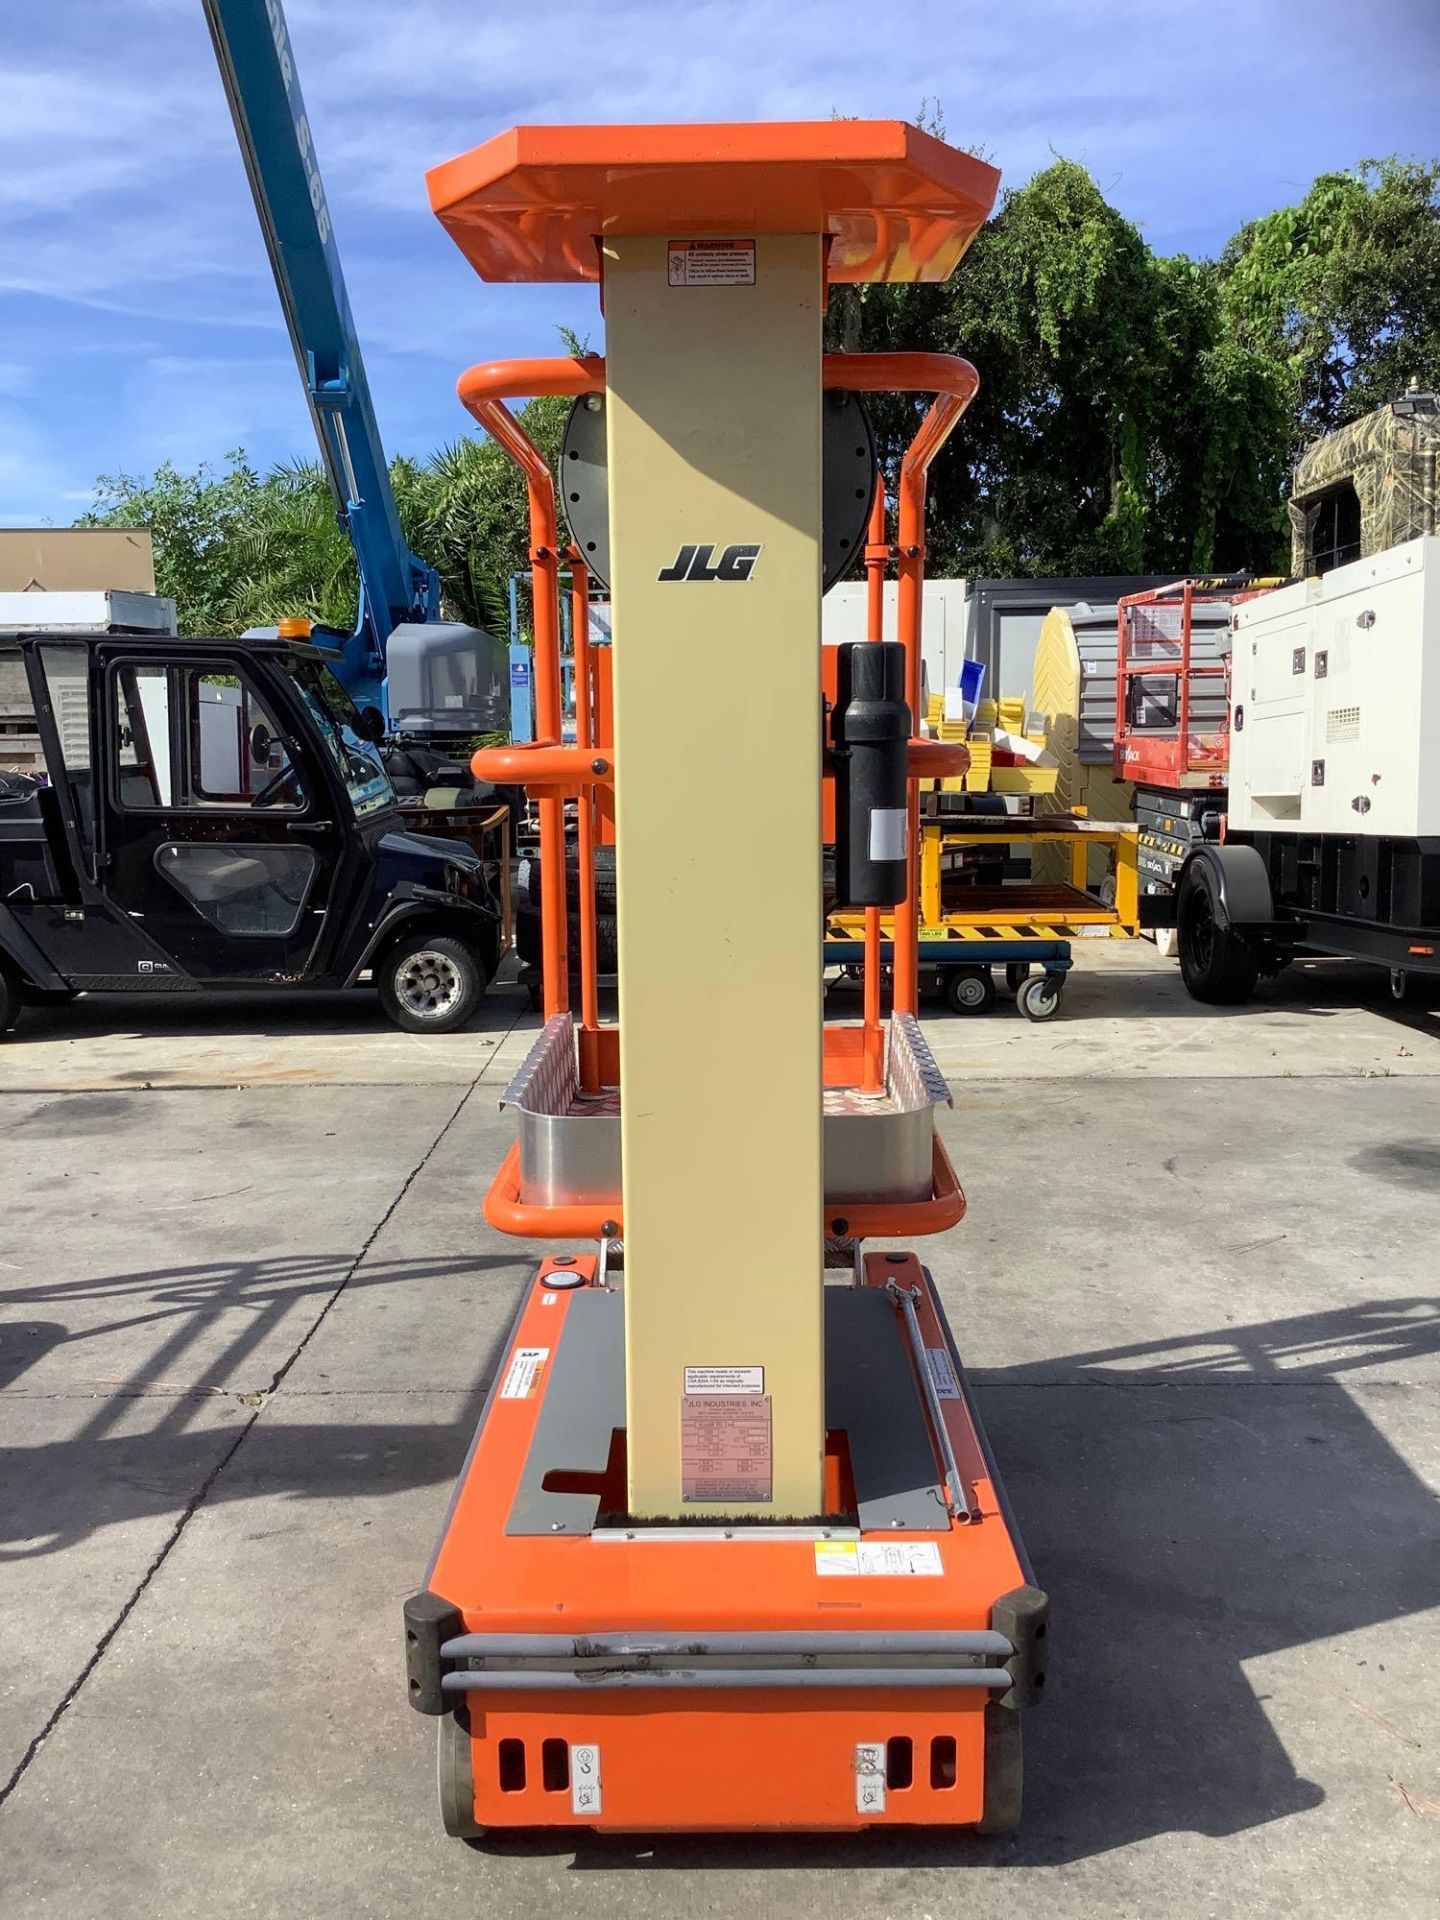 2018 JLG ECOLIFT 70,MANUAL, APPROX MAX PLATFORM HEIGHT 7FT, NON MARKING TIRES - Image 5 of 10